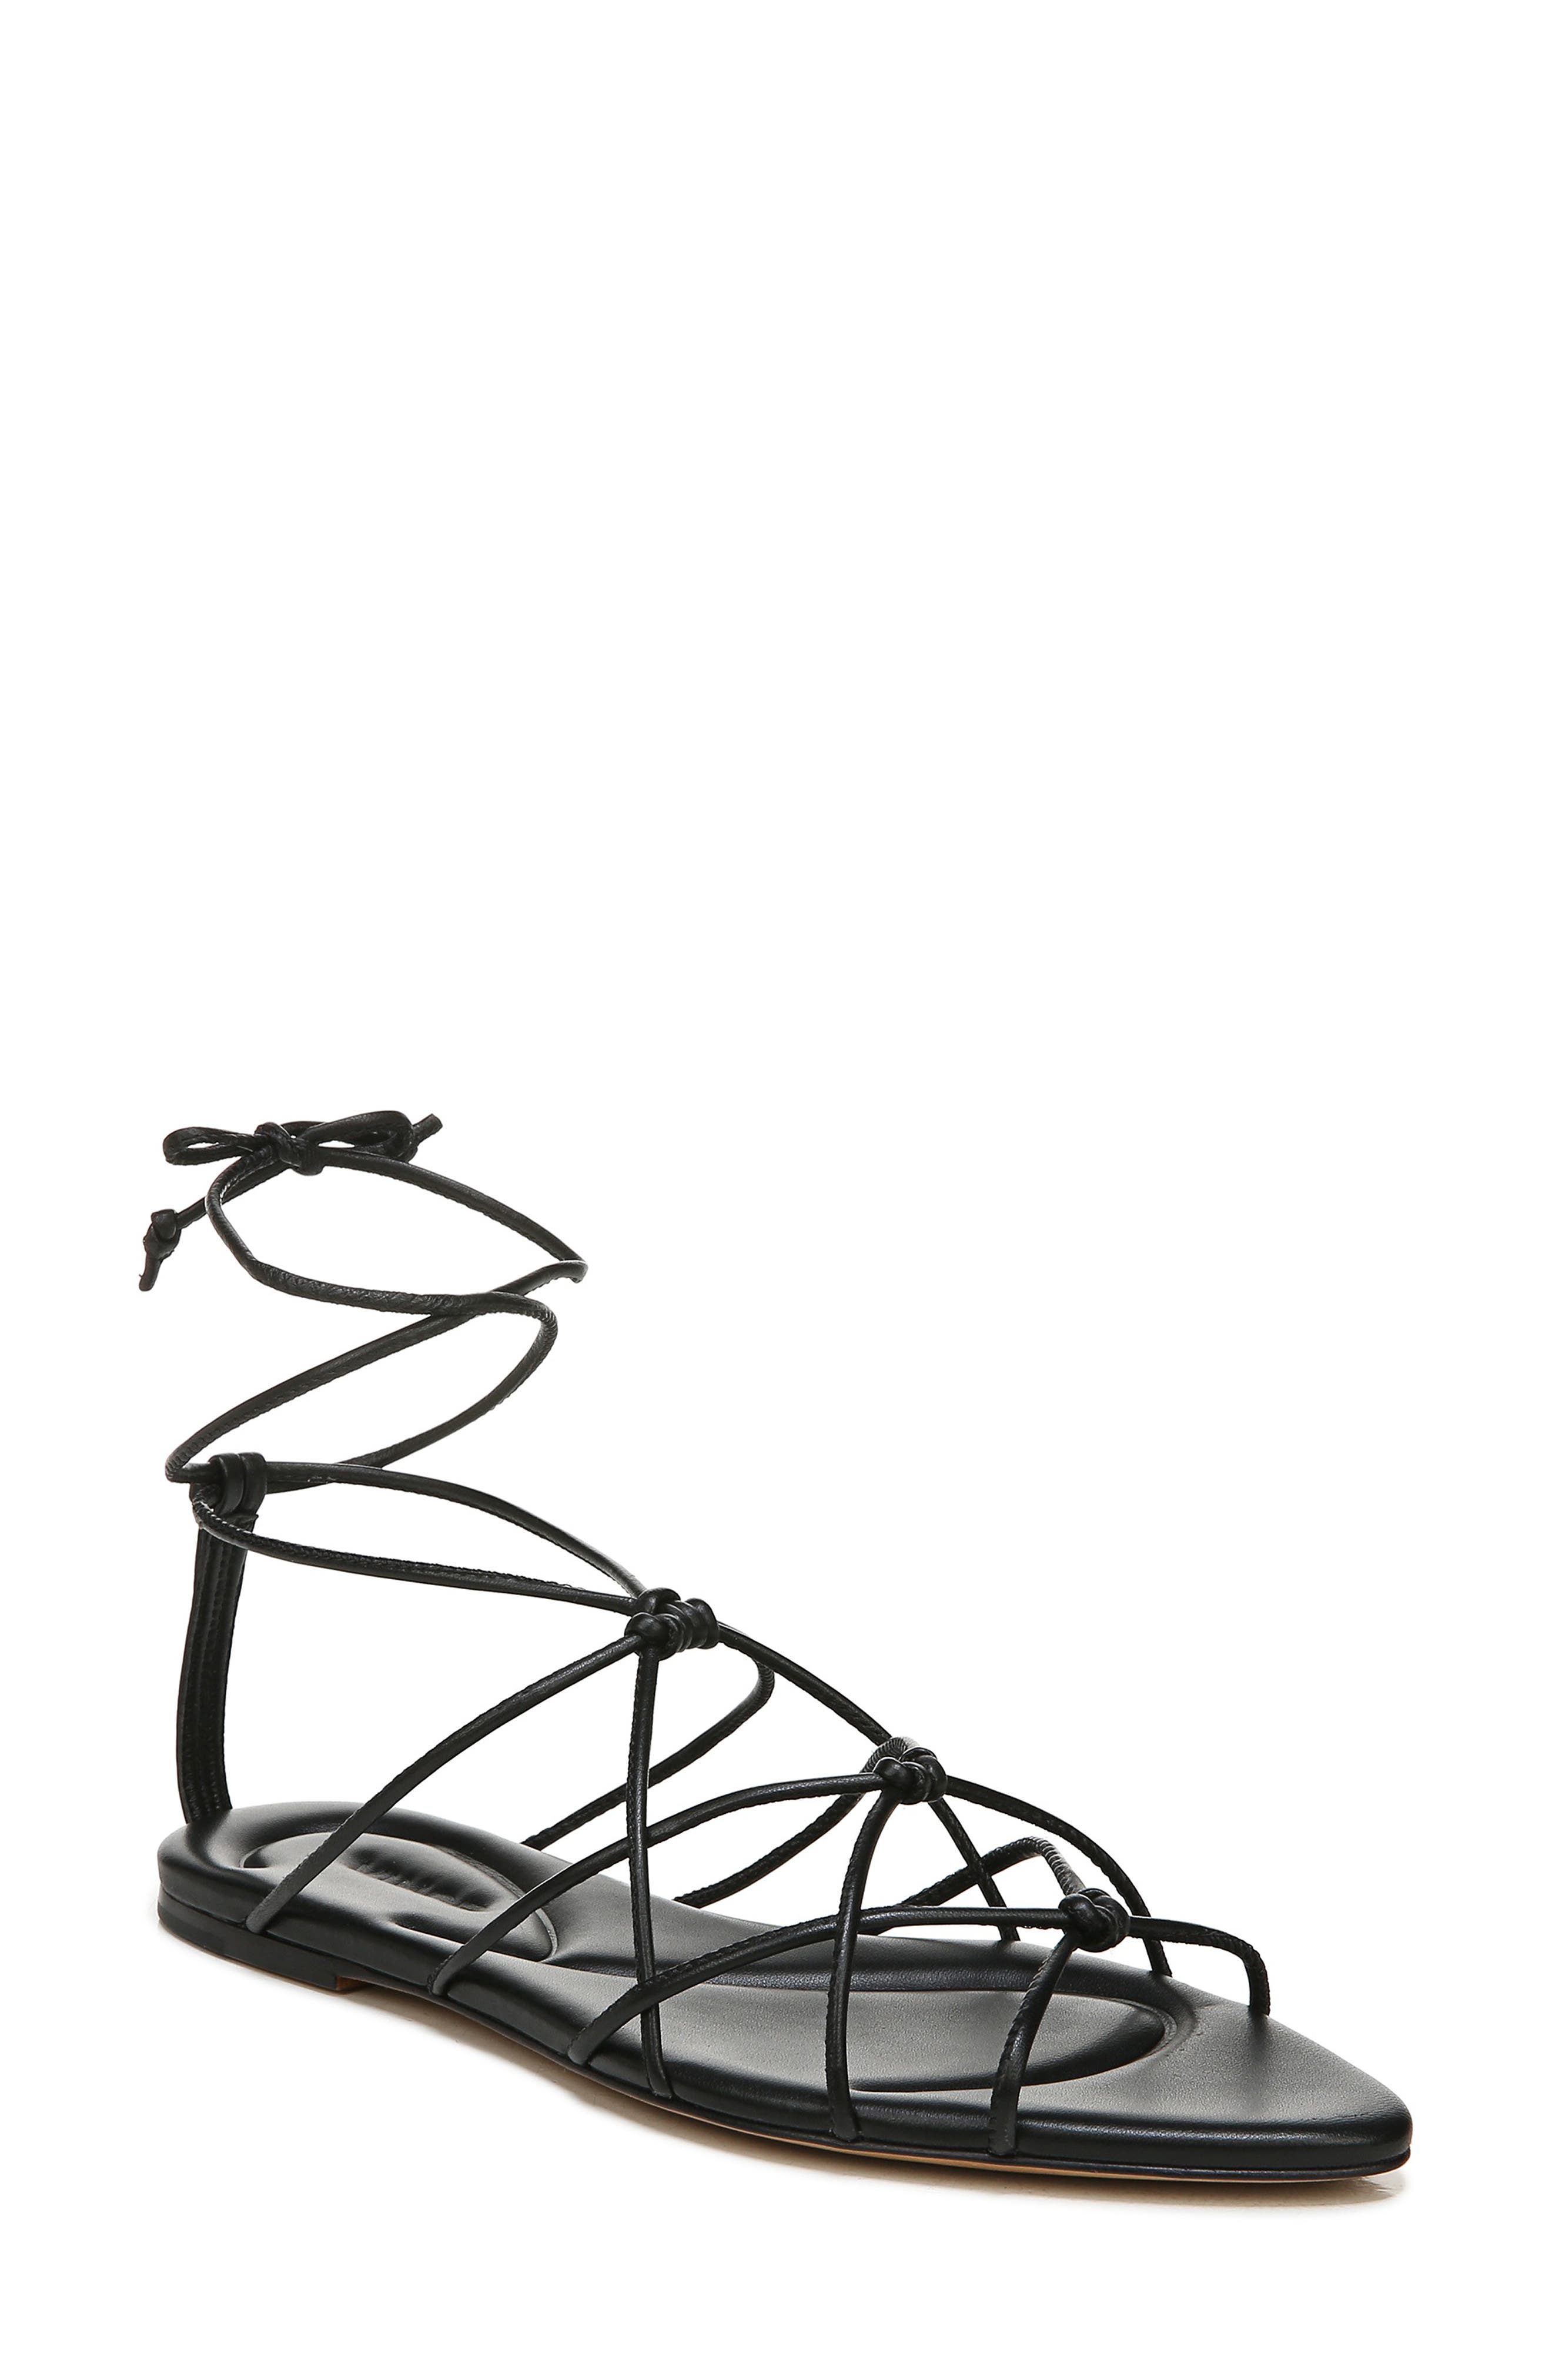 strappy flat sandals | Nordstrom